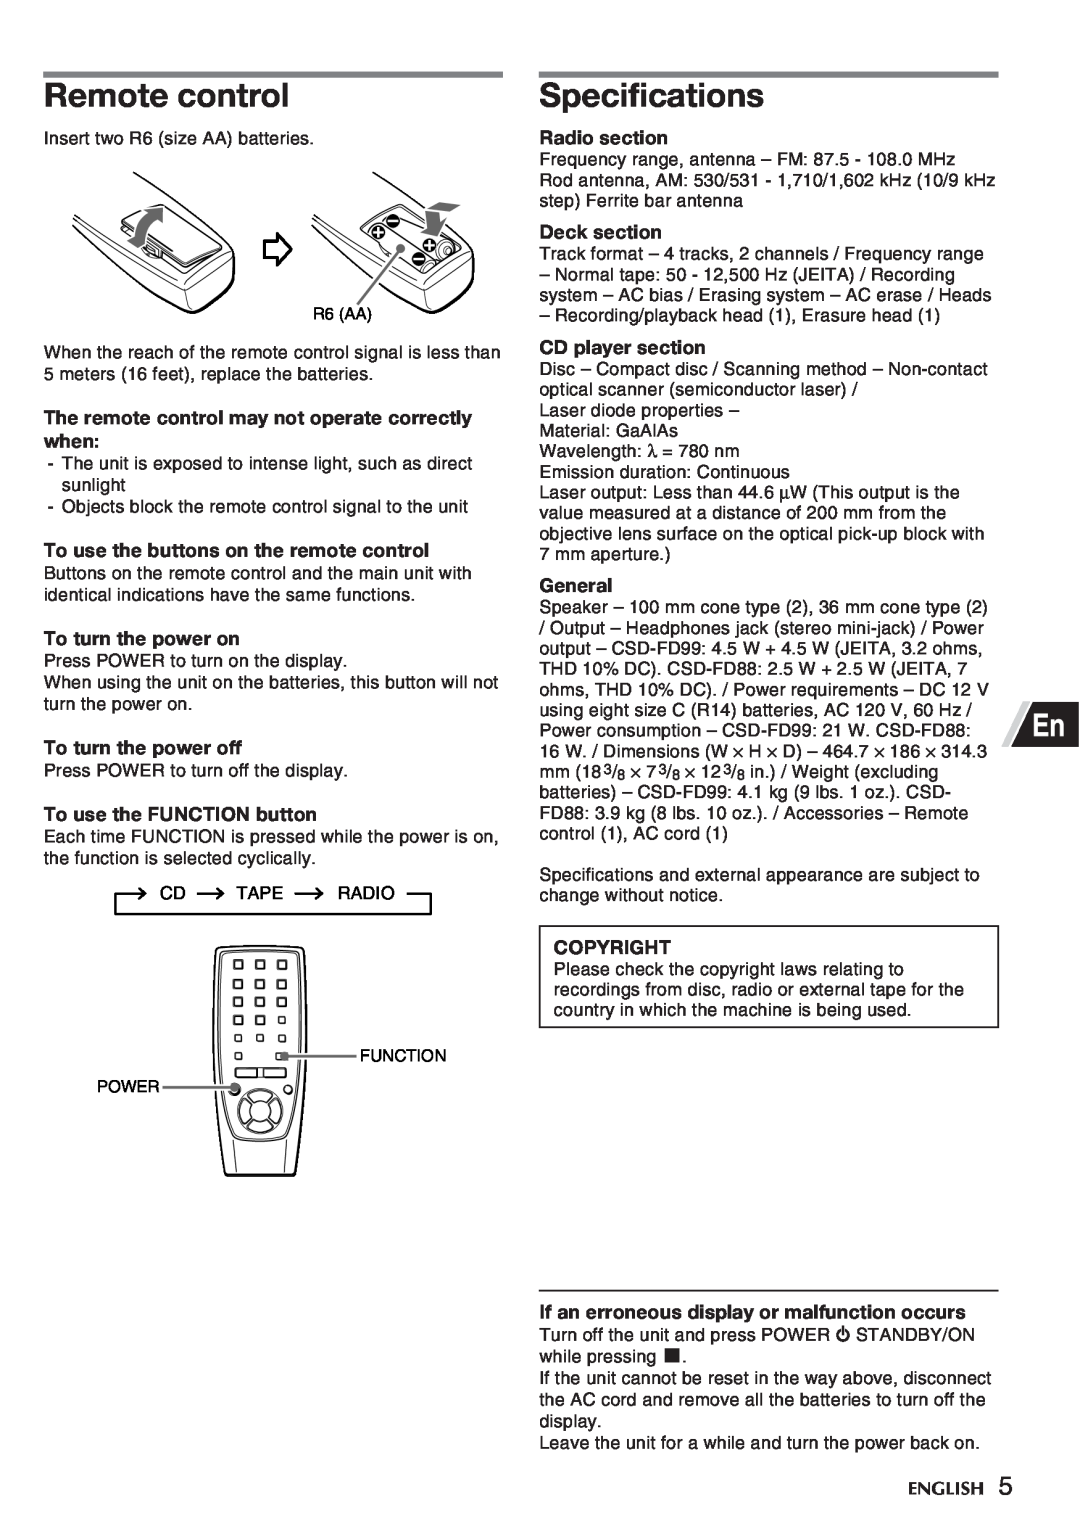 Aiwa CSD-FD88 Remote control, Specifications, The remote control may not operate correctly when, To turn the power on 